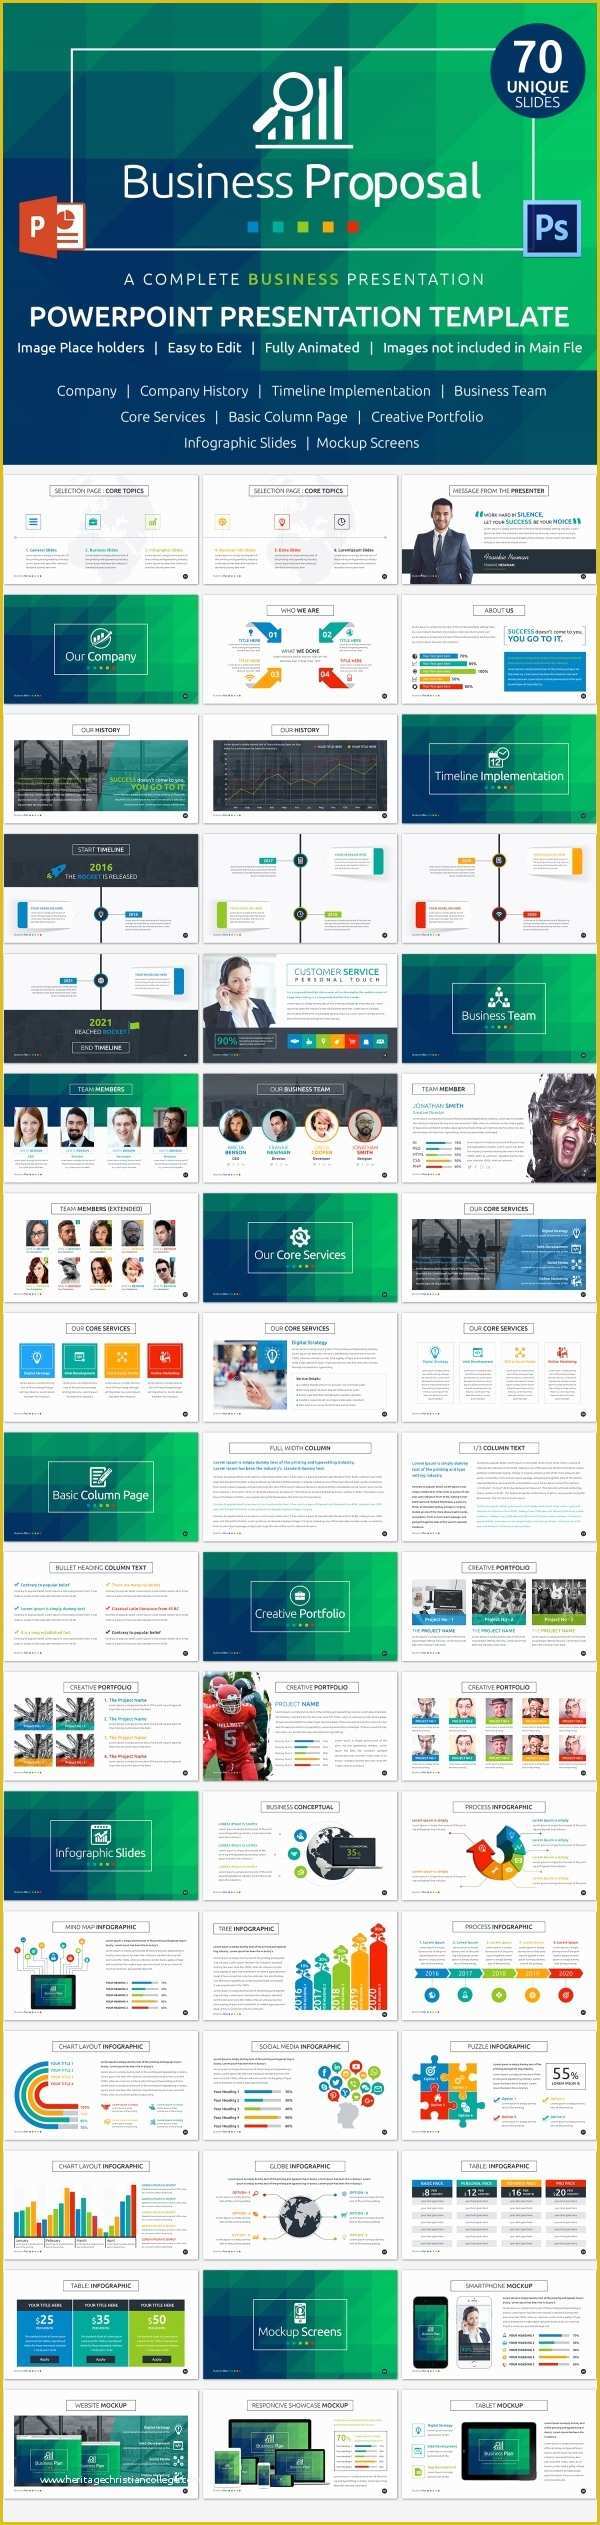 Free Proposal Presentation Template Of 25 Powerpoint Templates with Animation